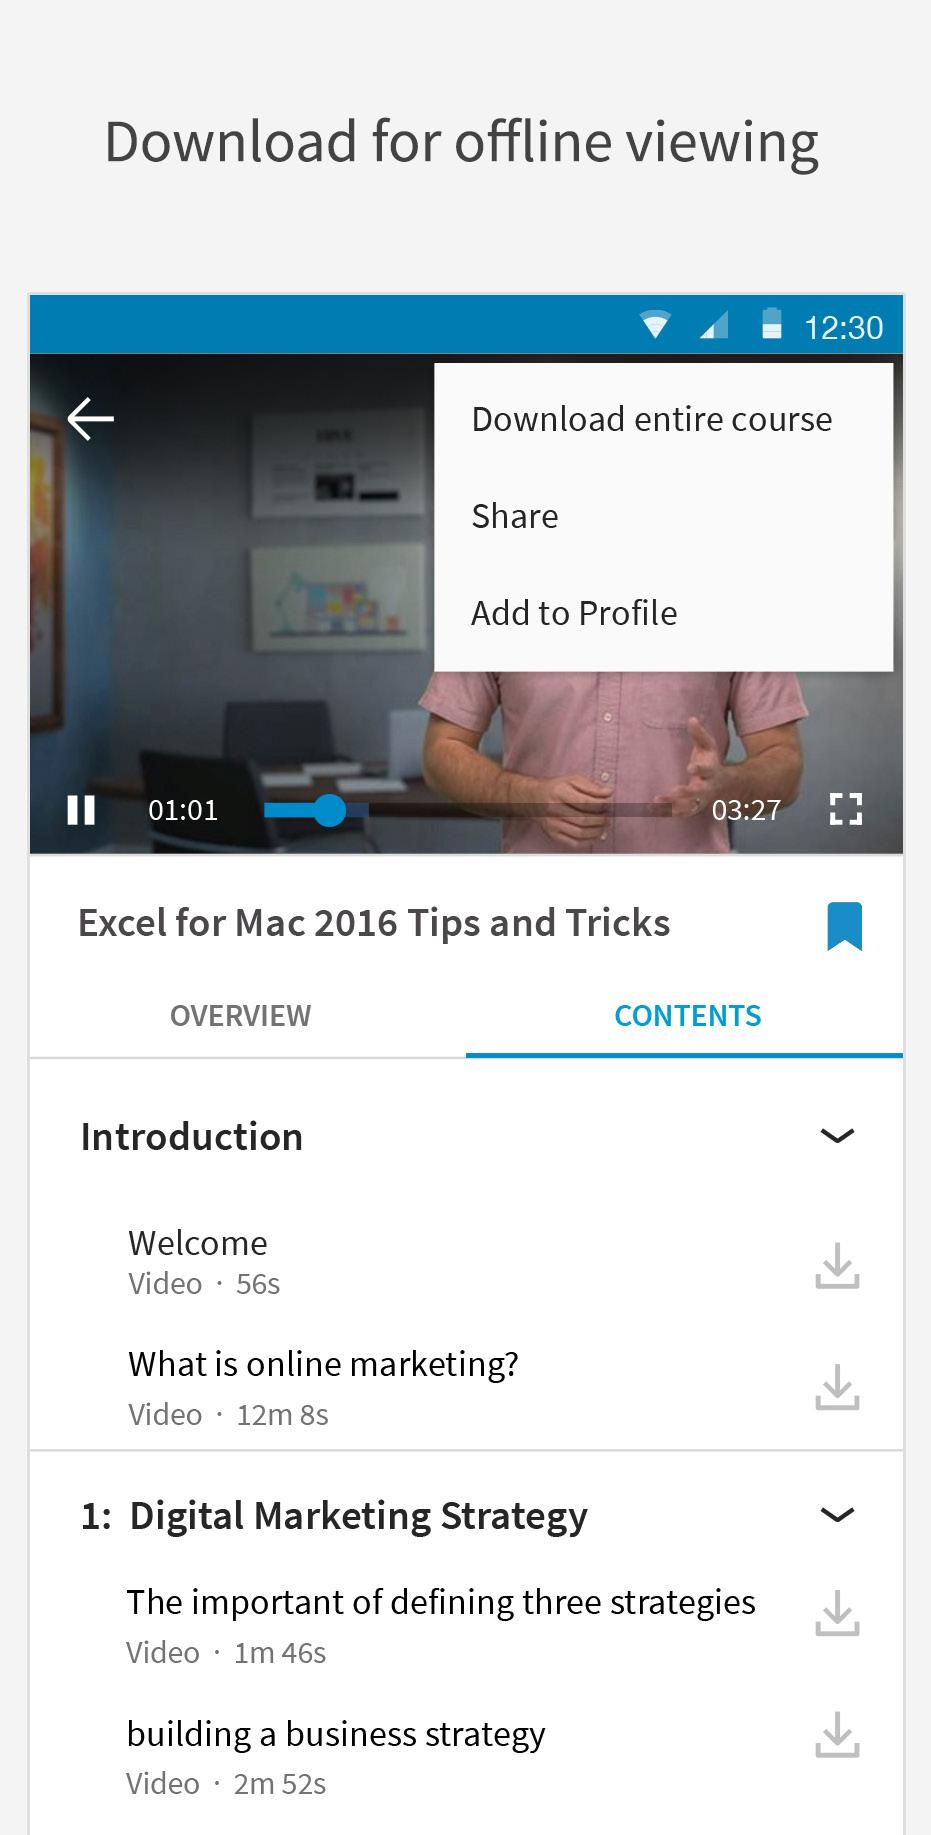 Taking a course on mobile LinkedIn Learning is available on ios and Android devices so you can learn on the go anytime and anywhere.